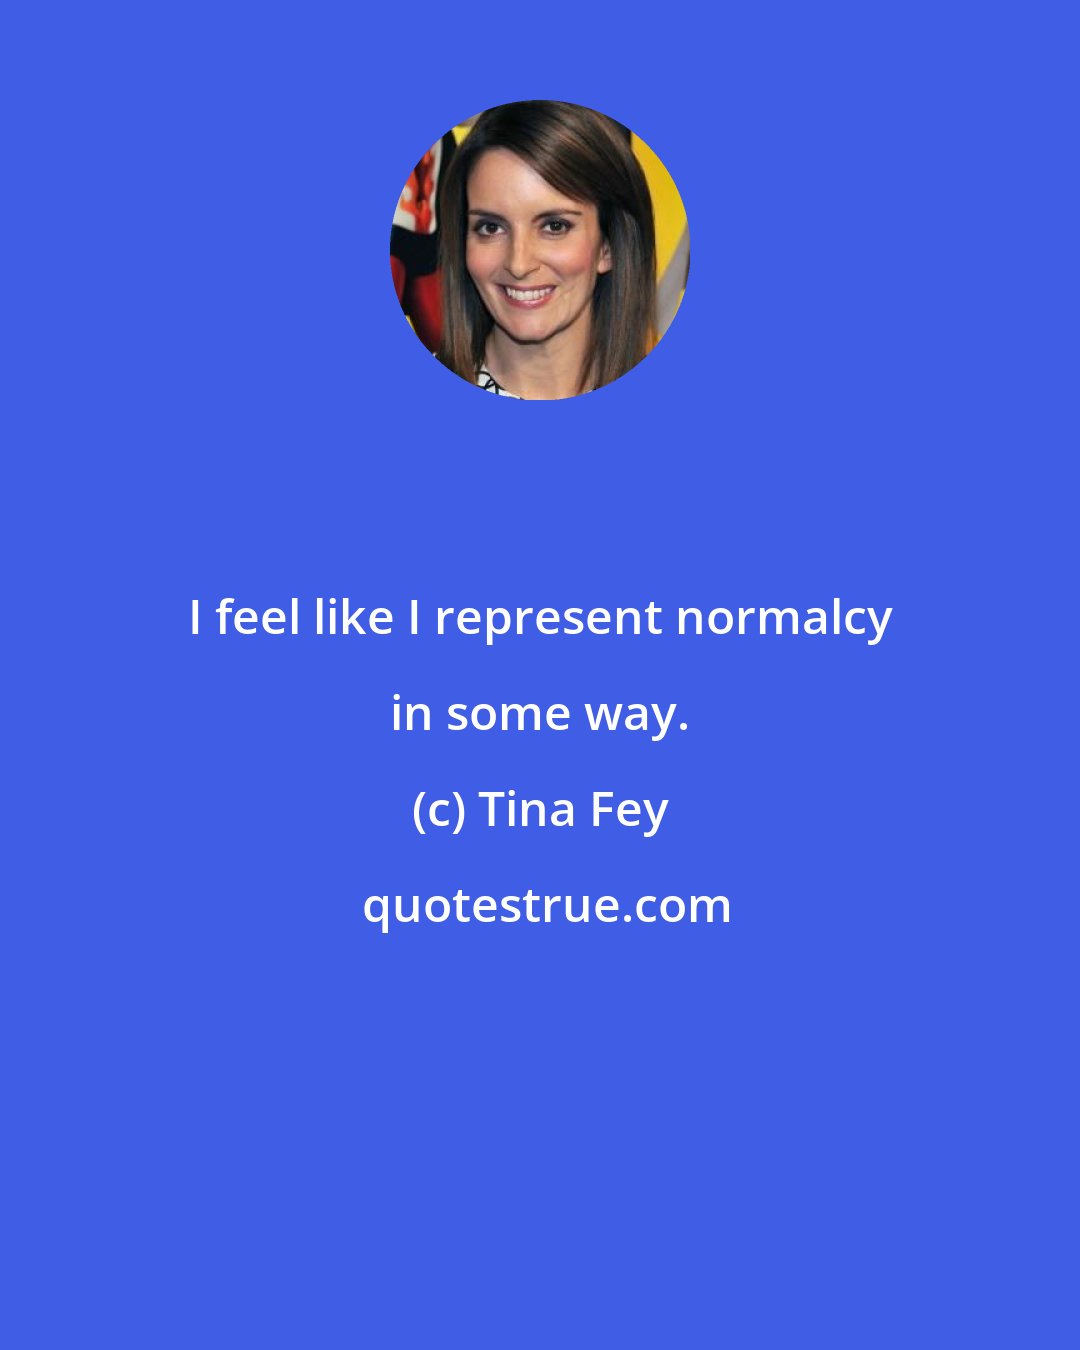 Tina Fey: I feel like I represent normalcy in some way.